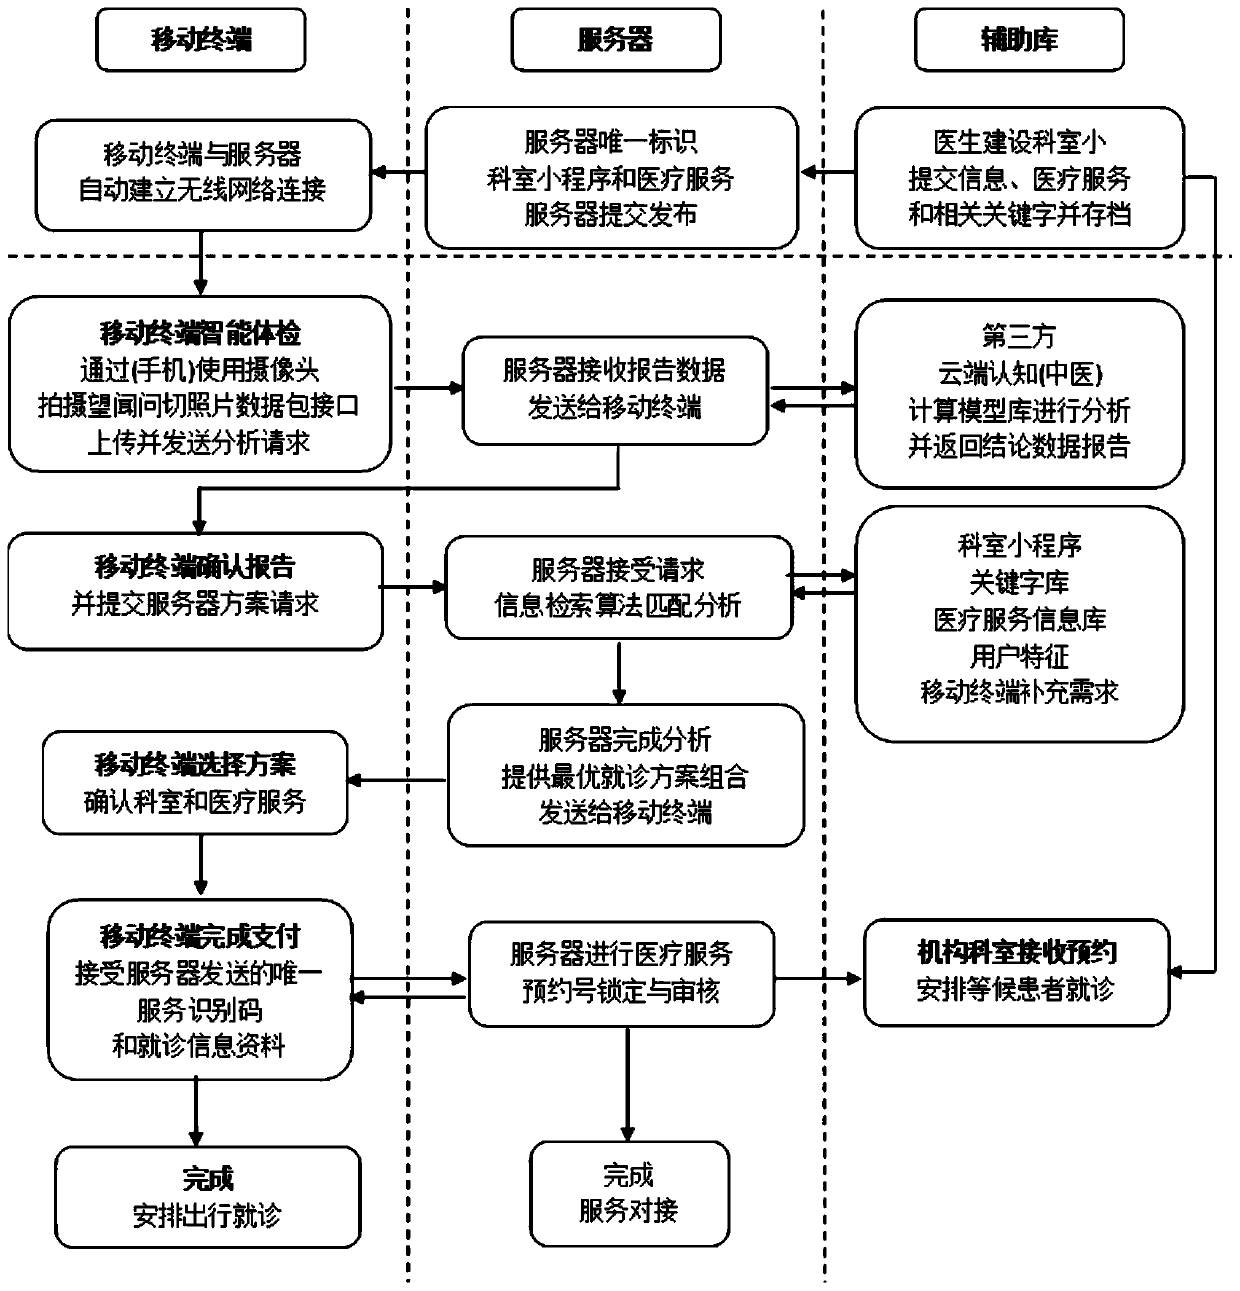 Maternal and child intelligent auxiliary medical health system and service method